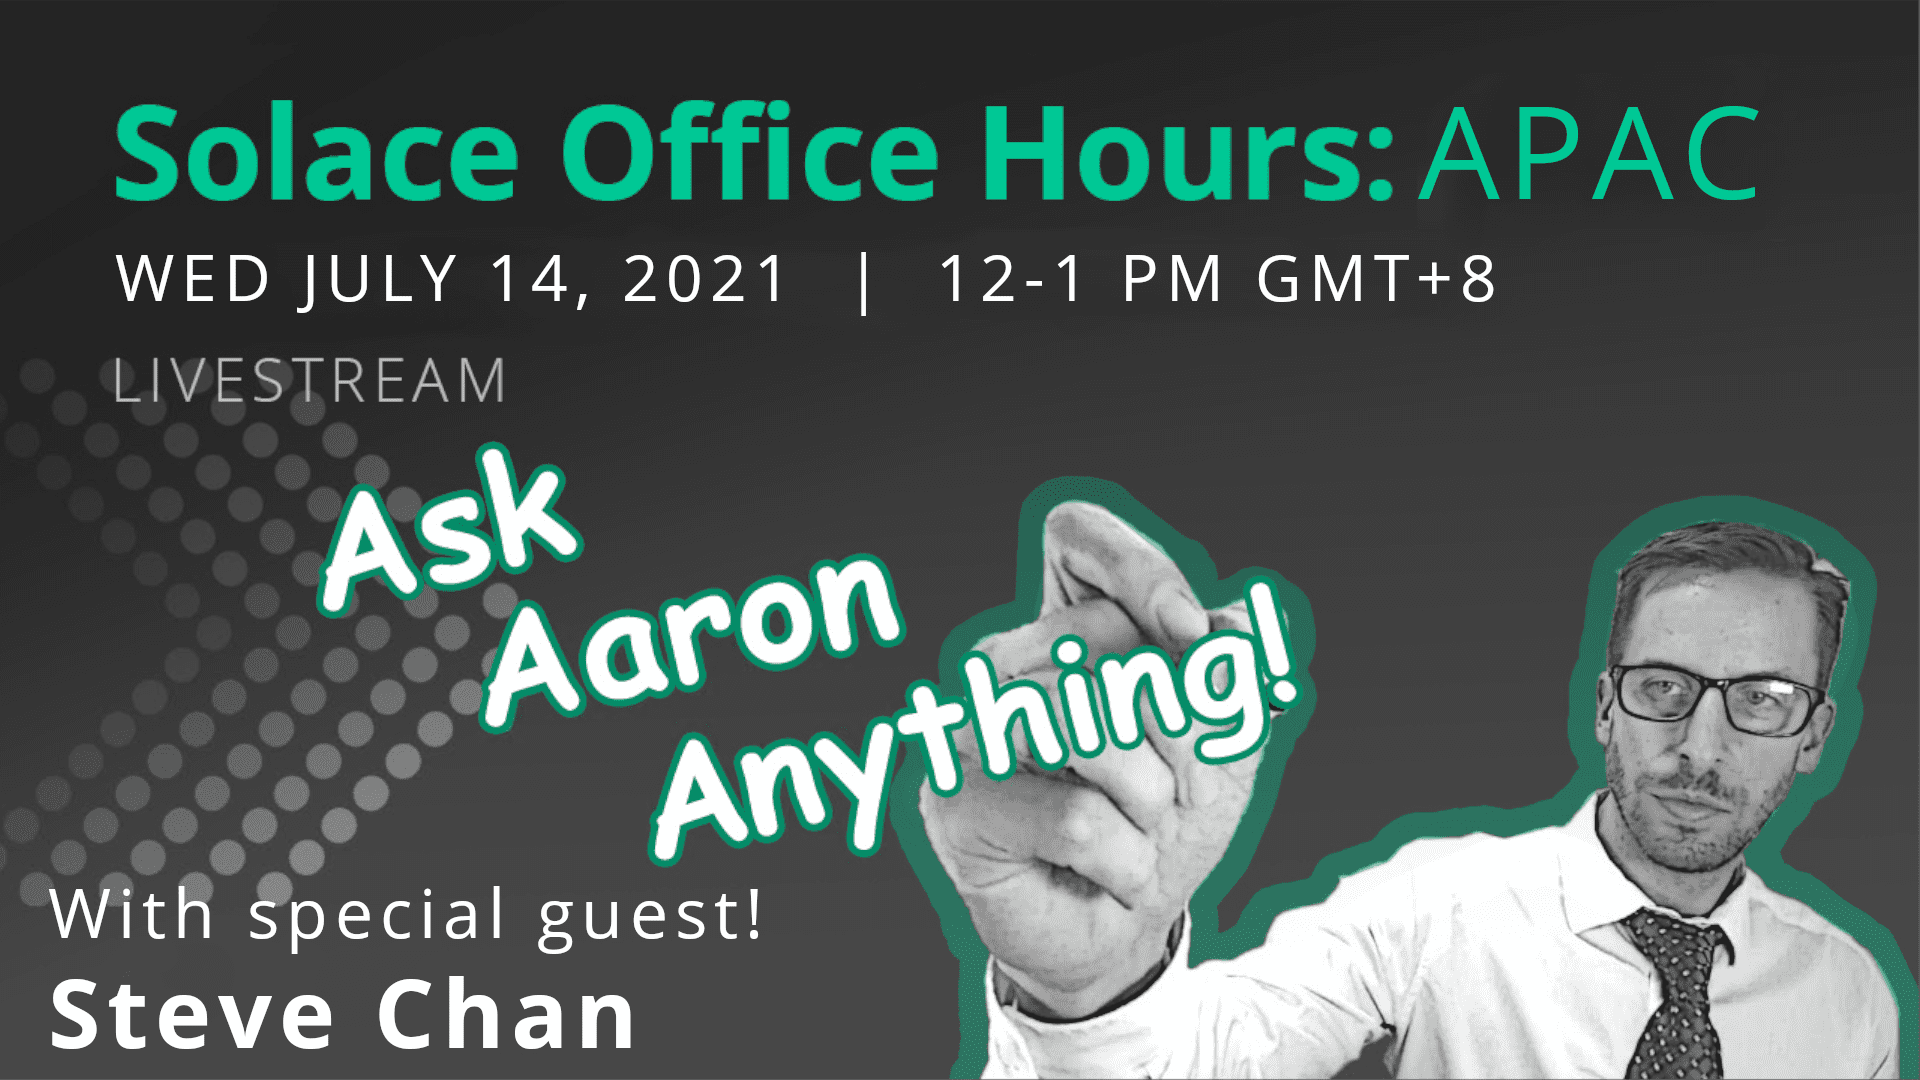 Solace Office Hours: APAC - July 14